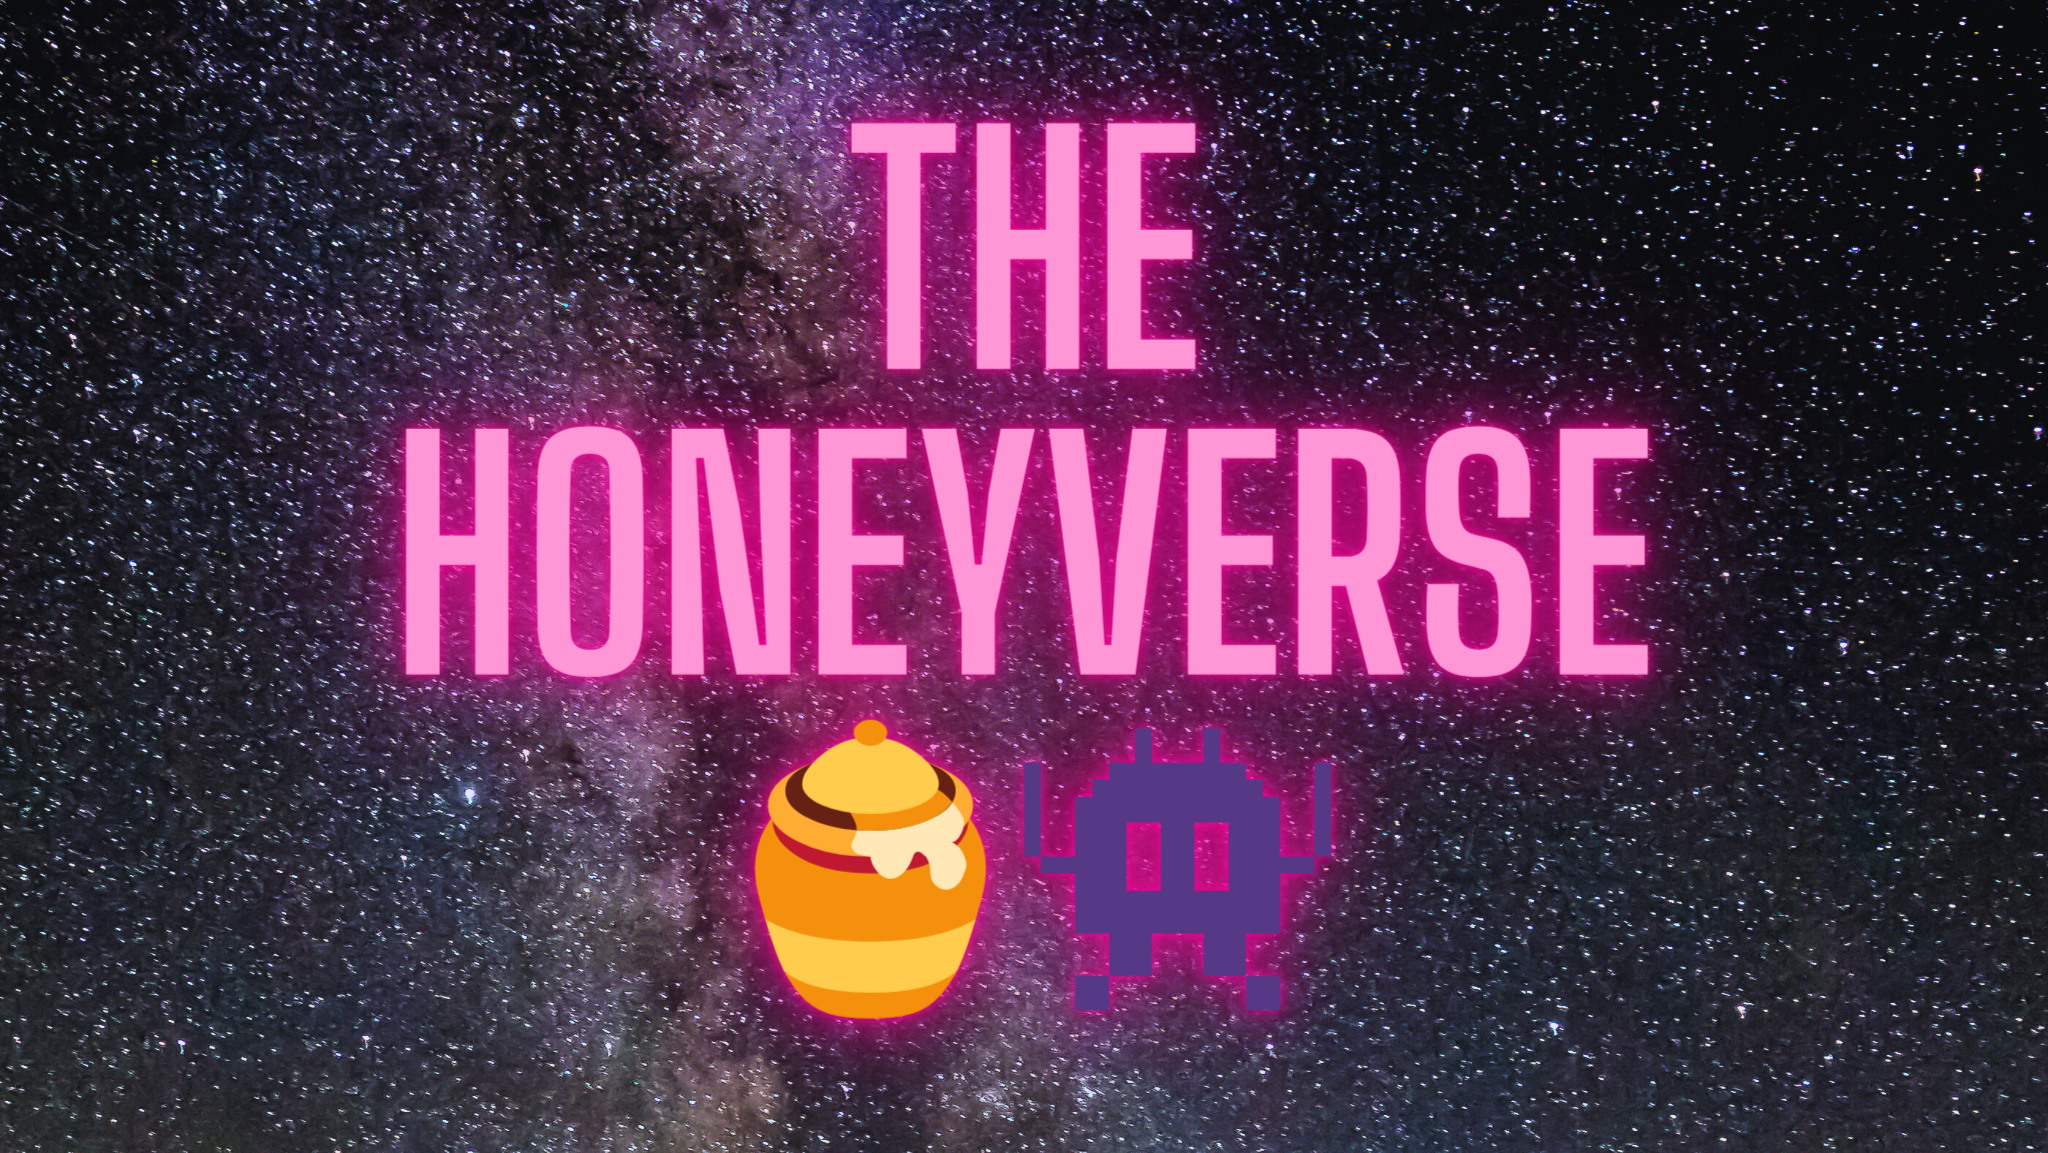 a startling picture of the honeyverse